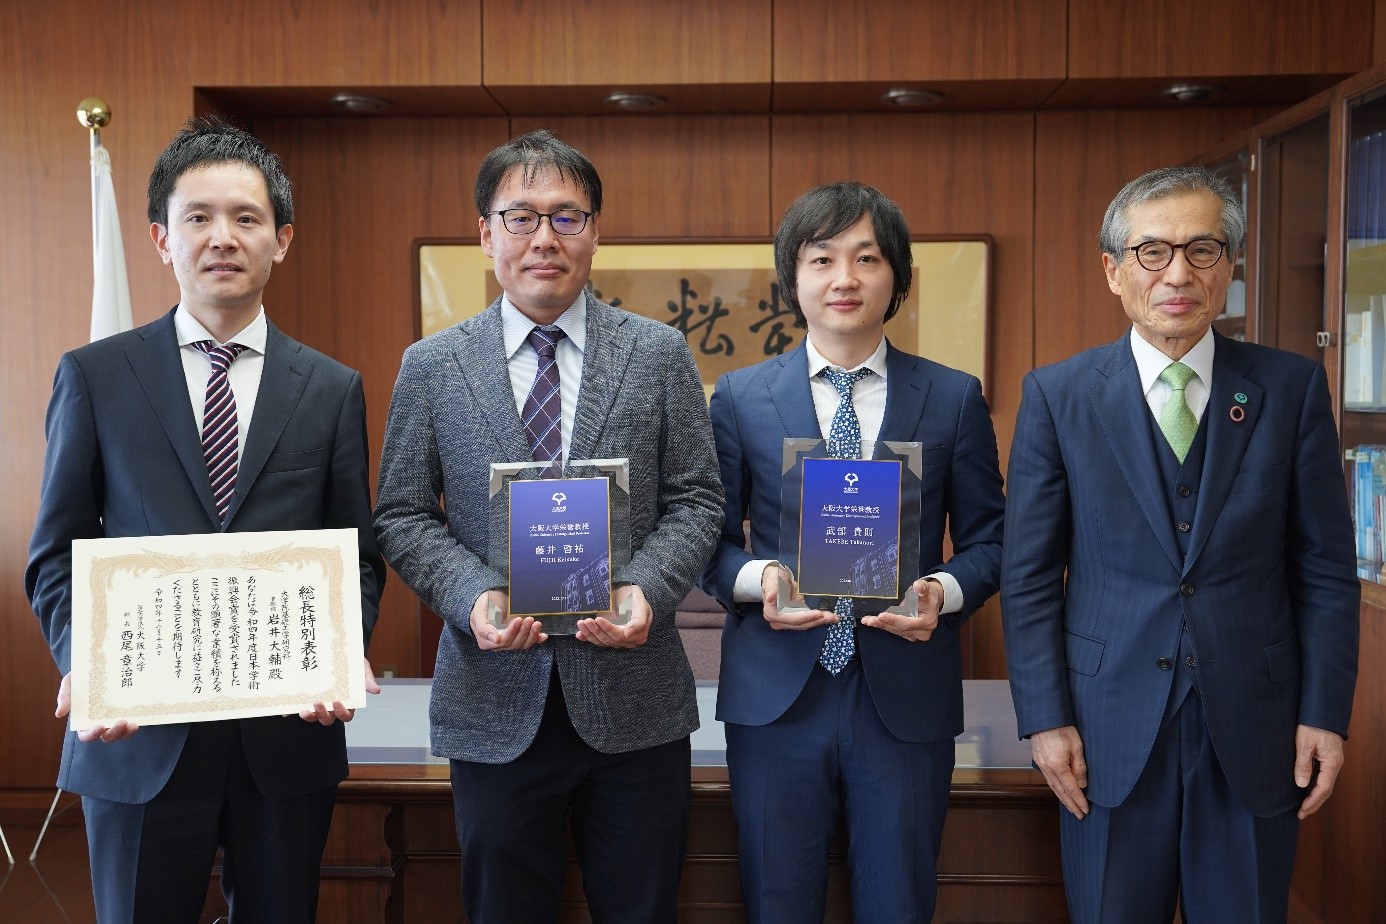 Award ceremonies held for the Distinguished Professor title and President's Special Prize